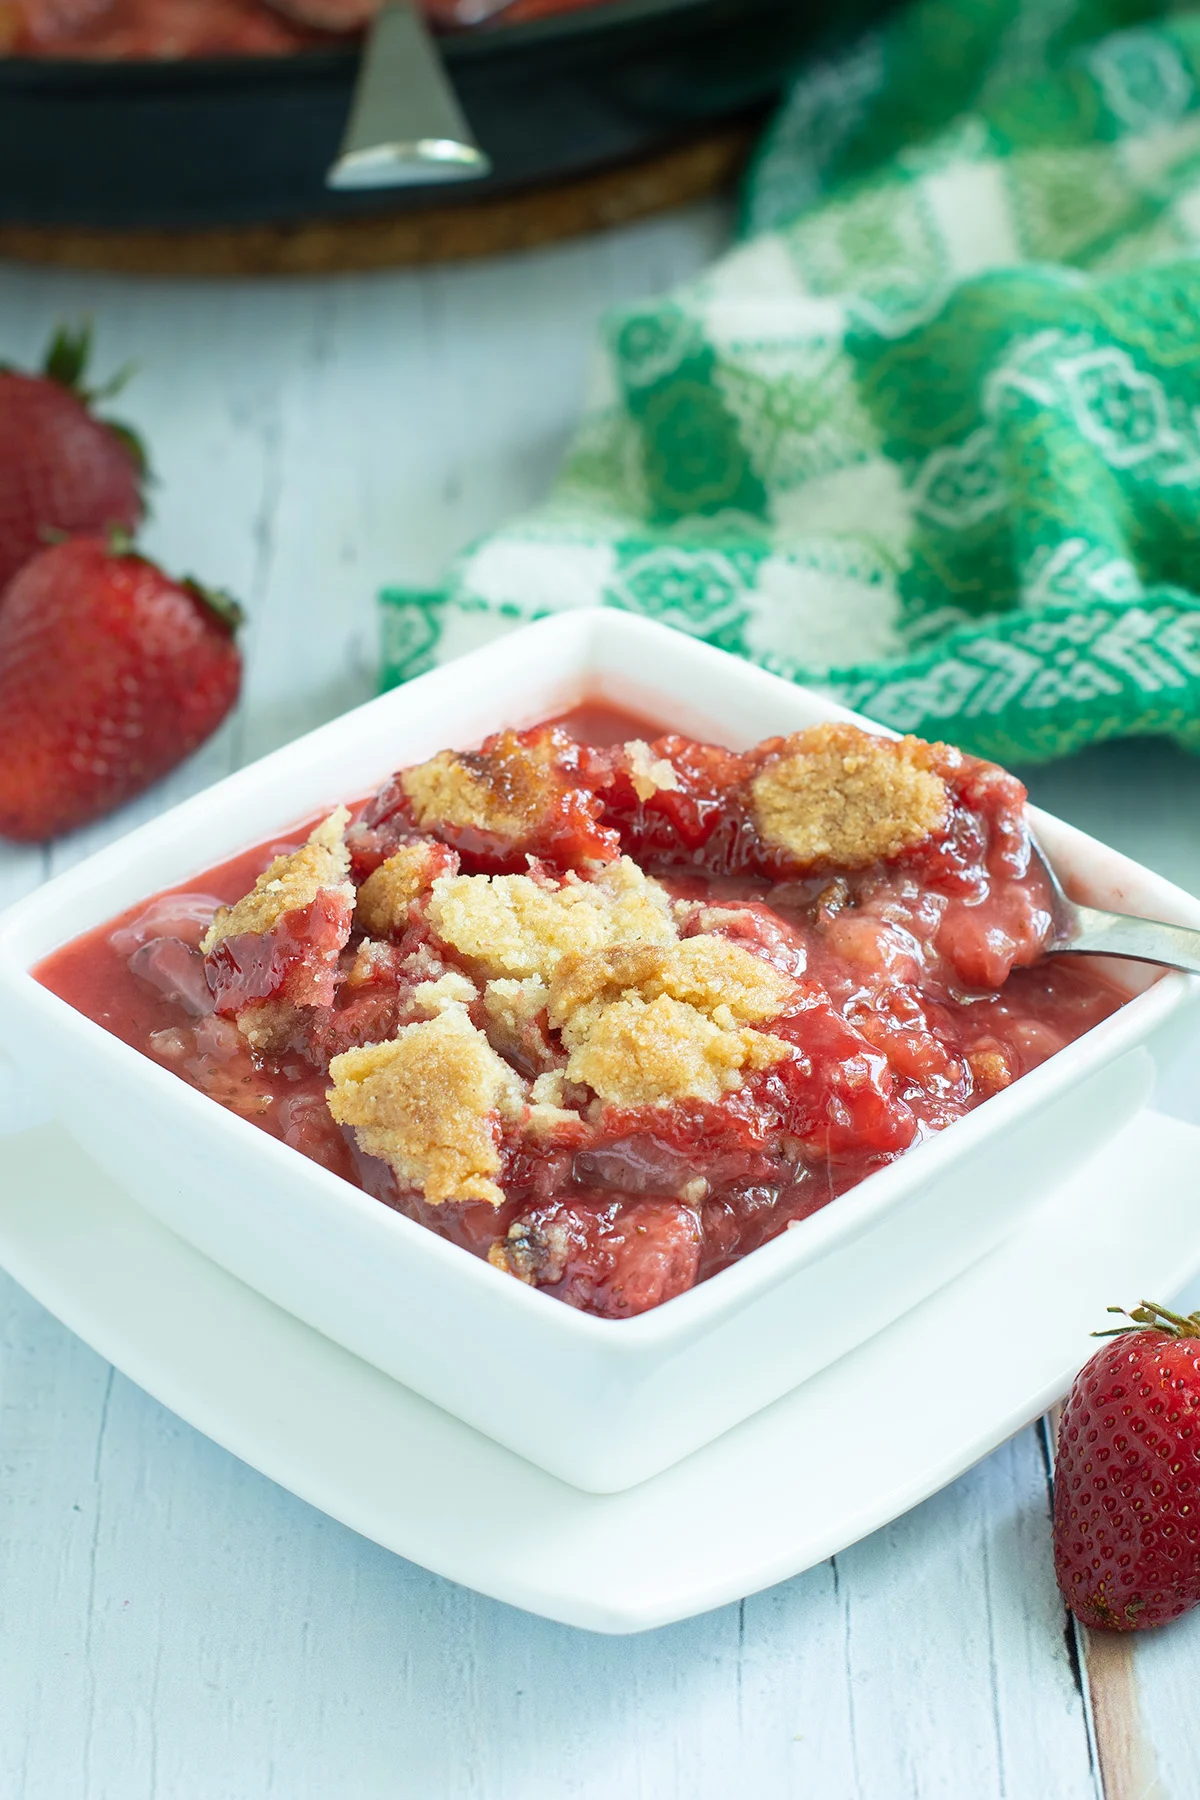 A bowl of strawberry crumble.